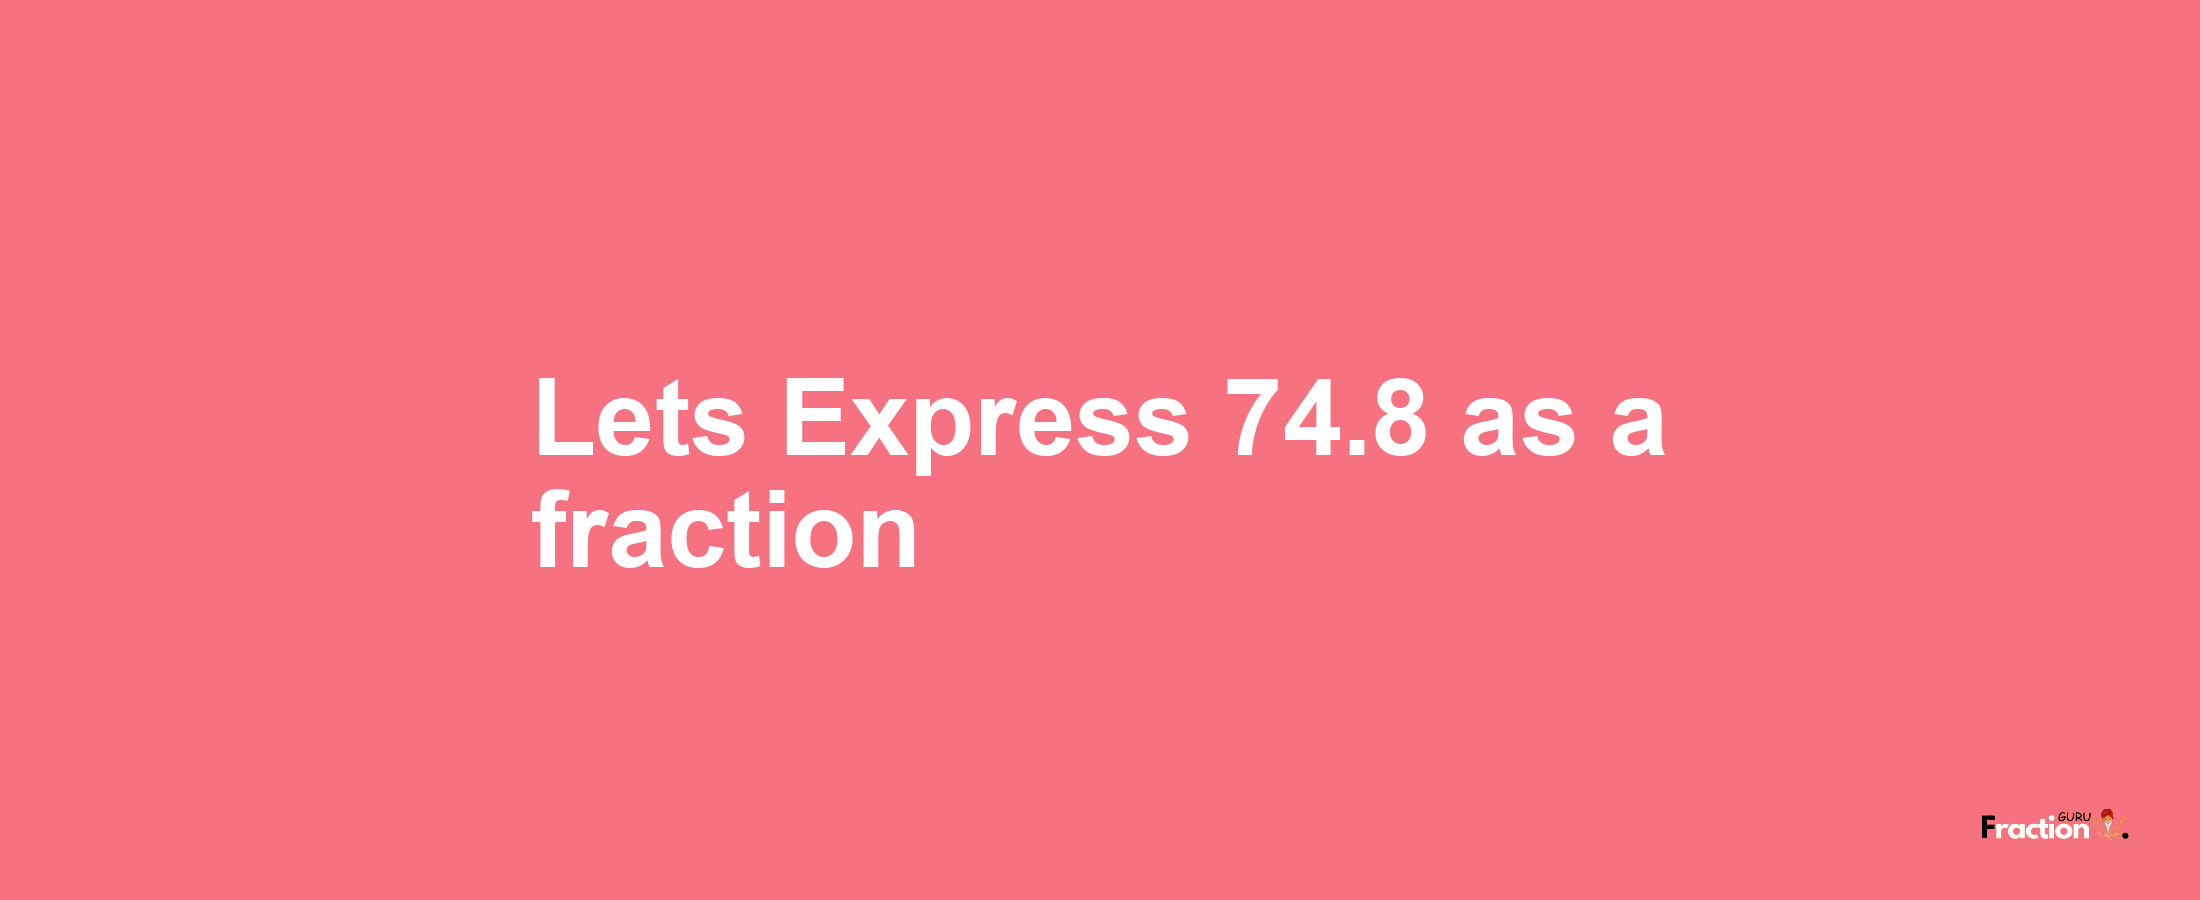 Lets Express 74.8 as afraction